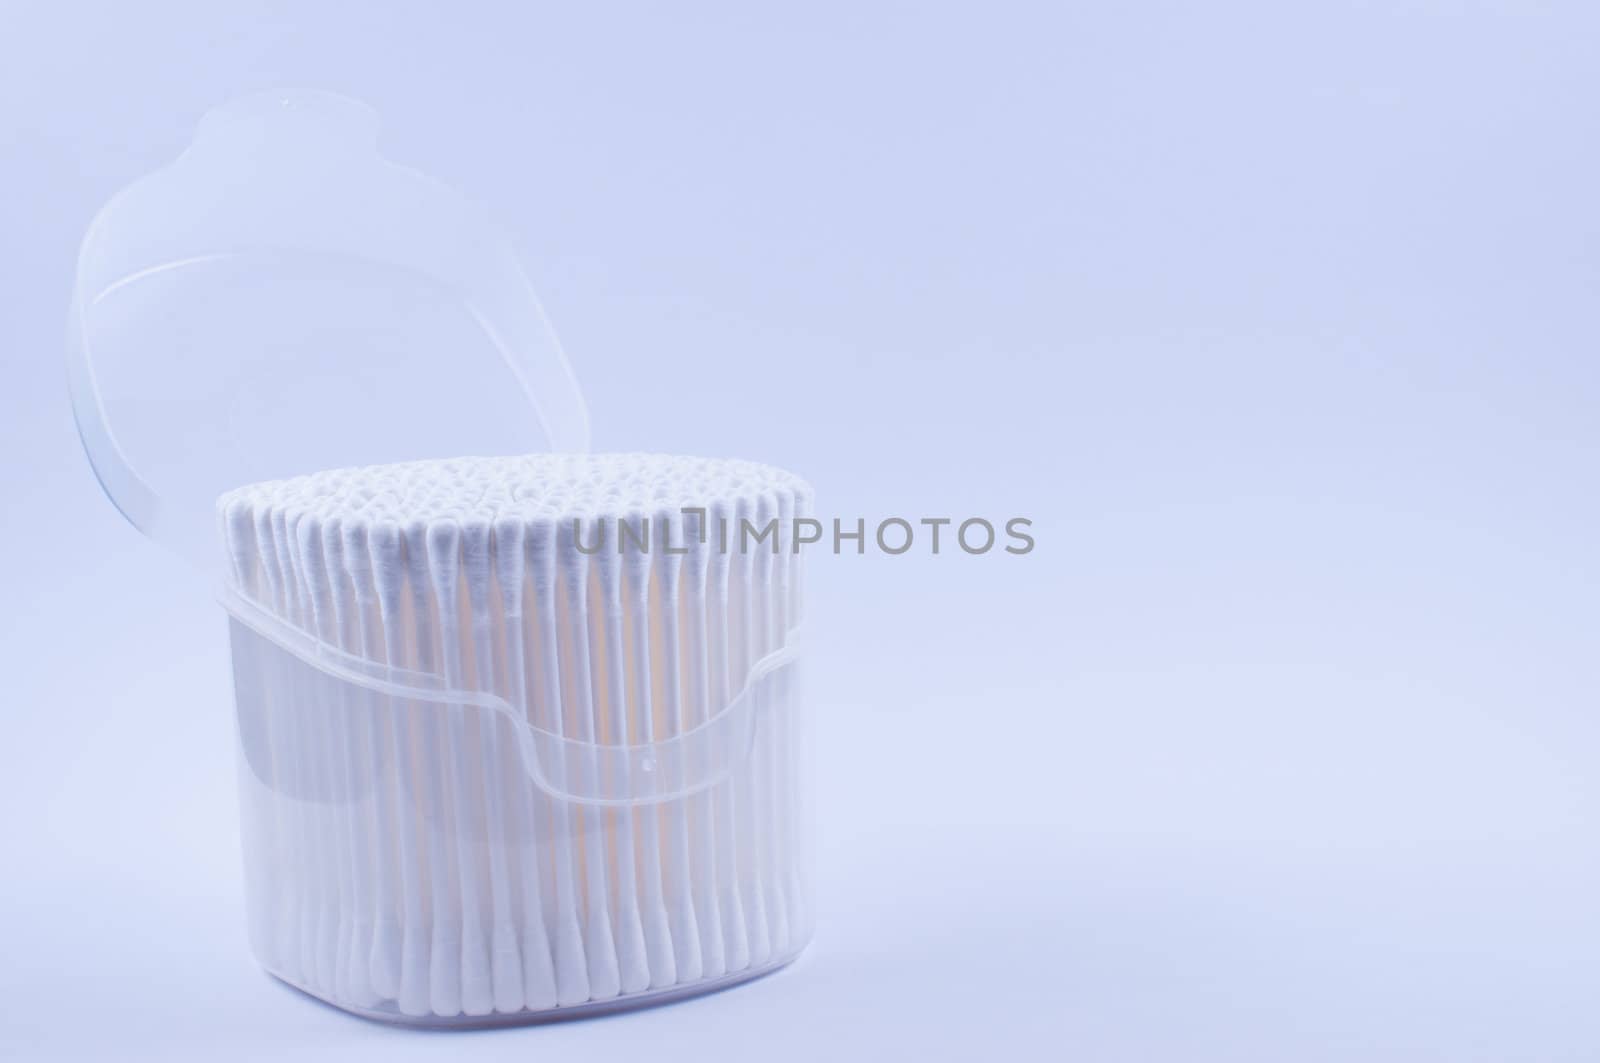 Cotton buds in open transparent plastic box with lid